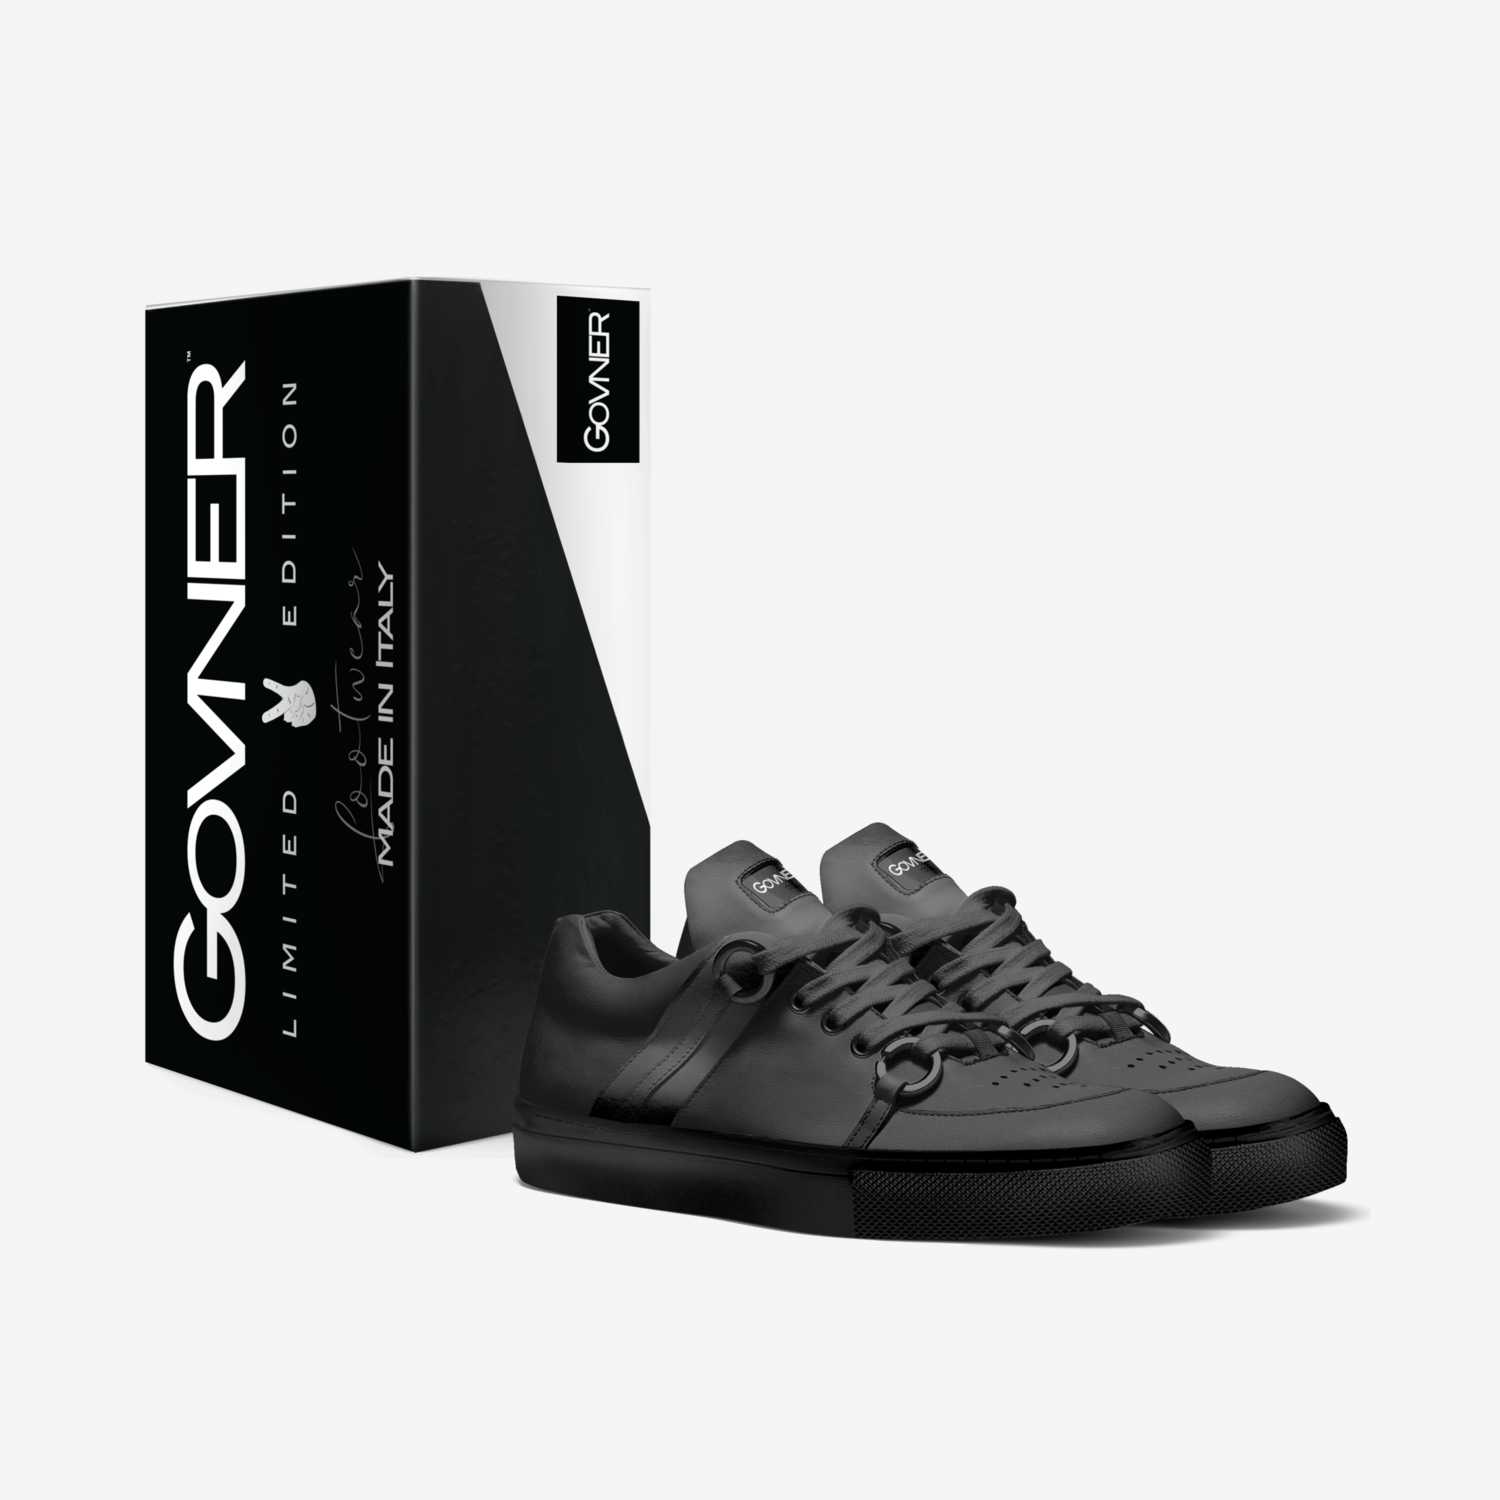 Govner Underground custom made in Italy shoes by Govner Leather | Box view